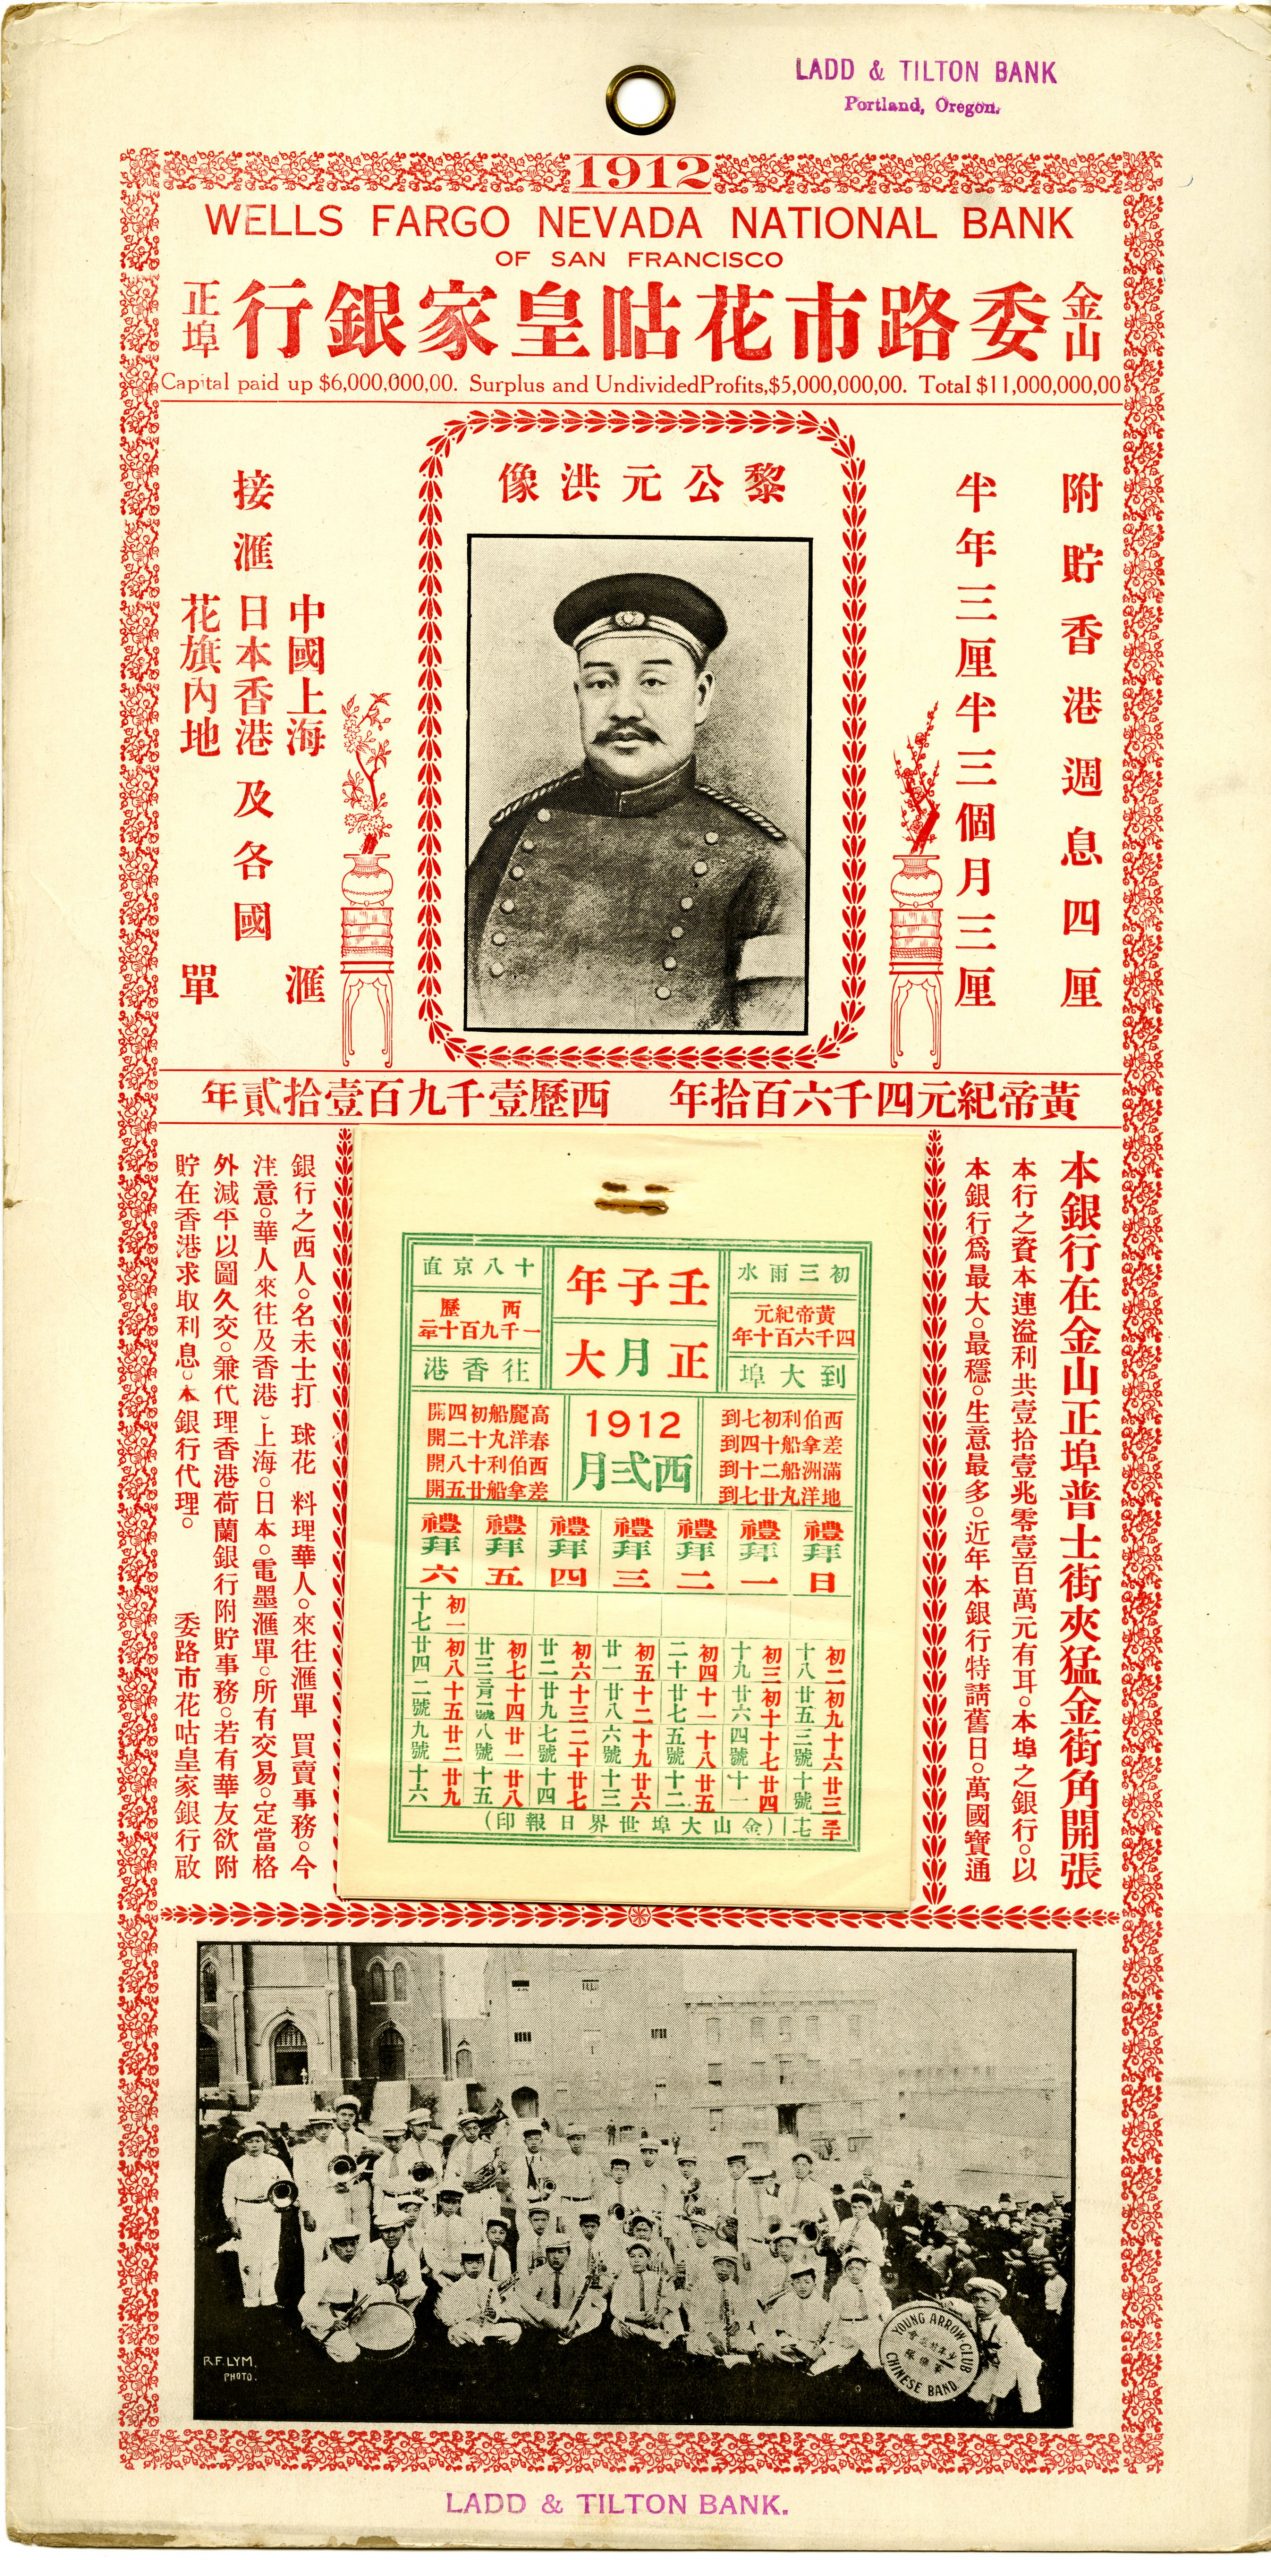 This 1912 calendar has characters in green to mark the days according to the lunar calendar with the solar calendar in red. This version features a photo of an unknown man and a group picture described as the Young Arrow Club Chinese Band.